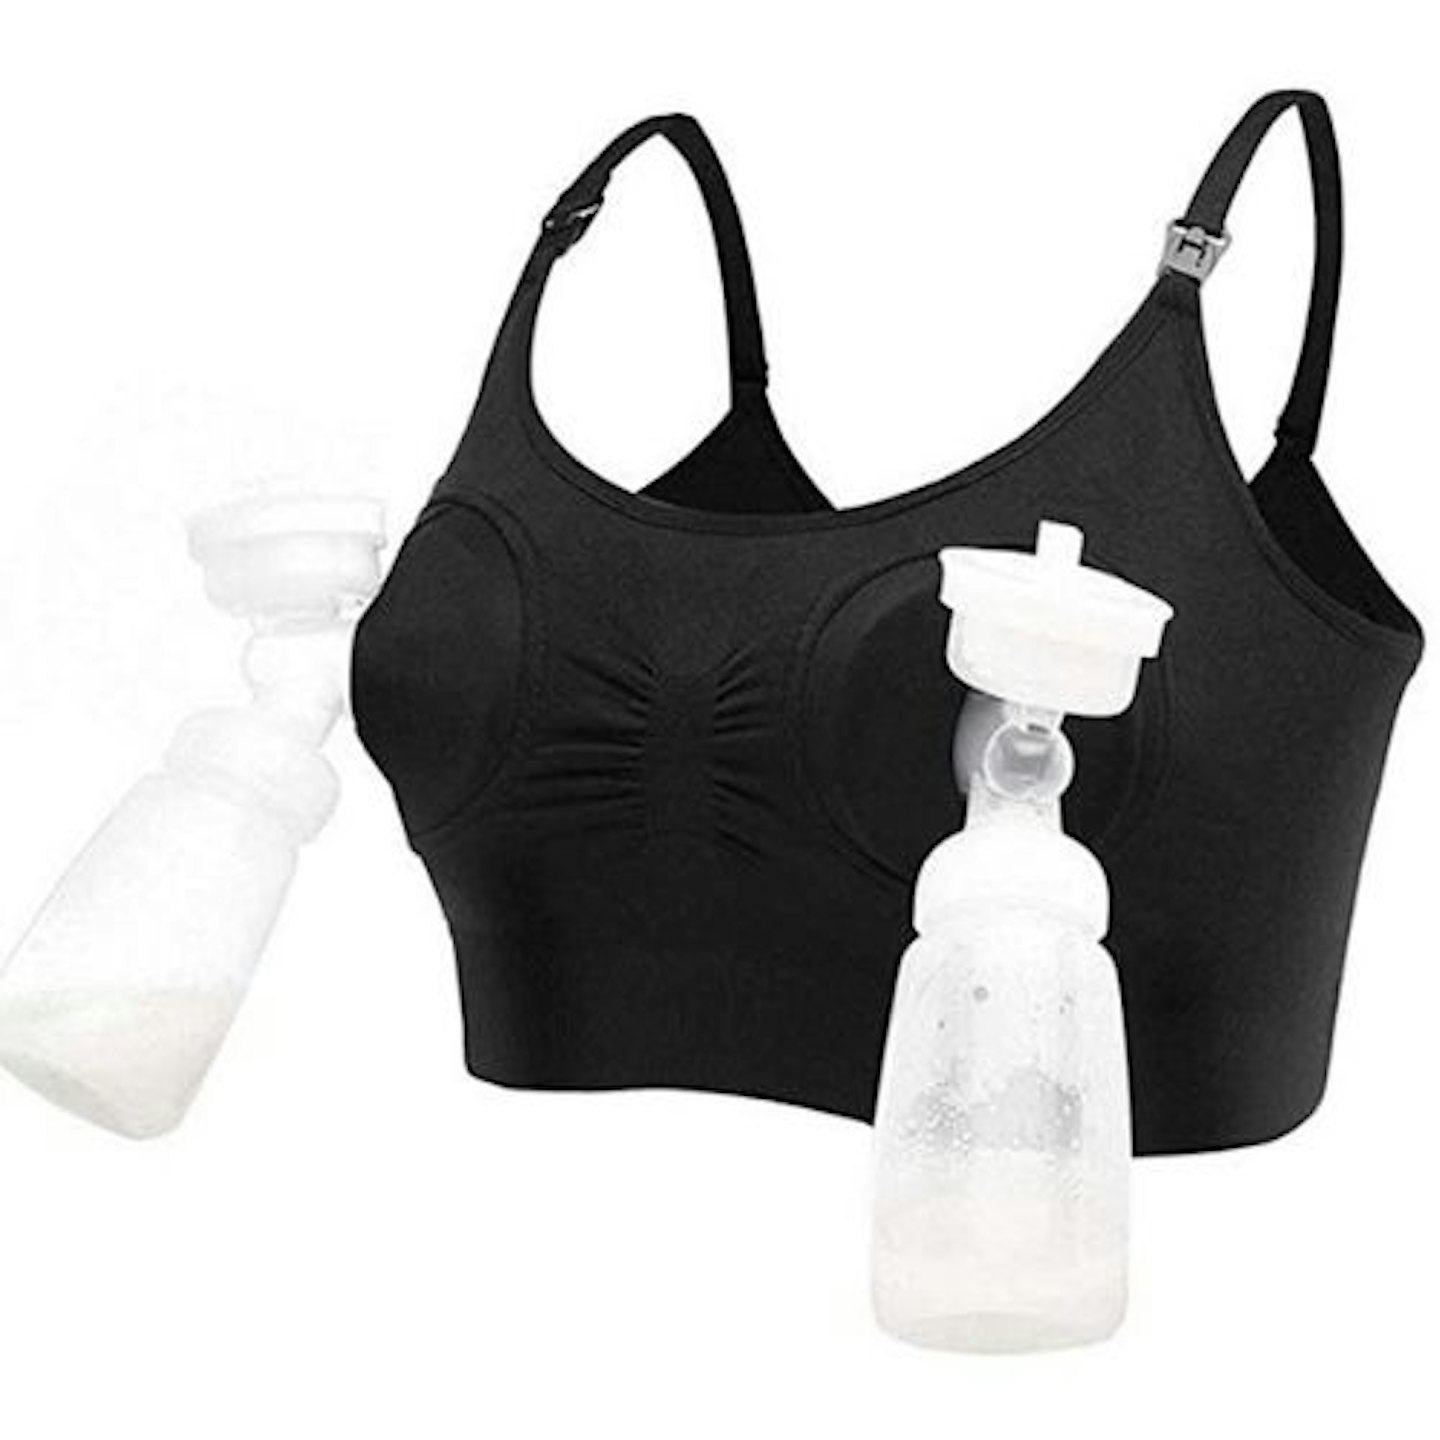 Simple Wishes X-Small/Large, Hands-Free Breast Pump Bra